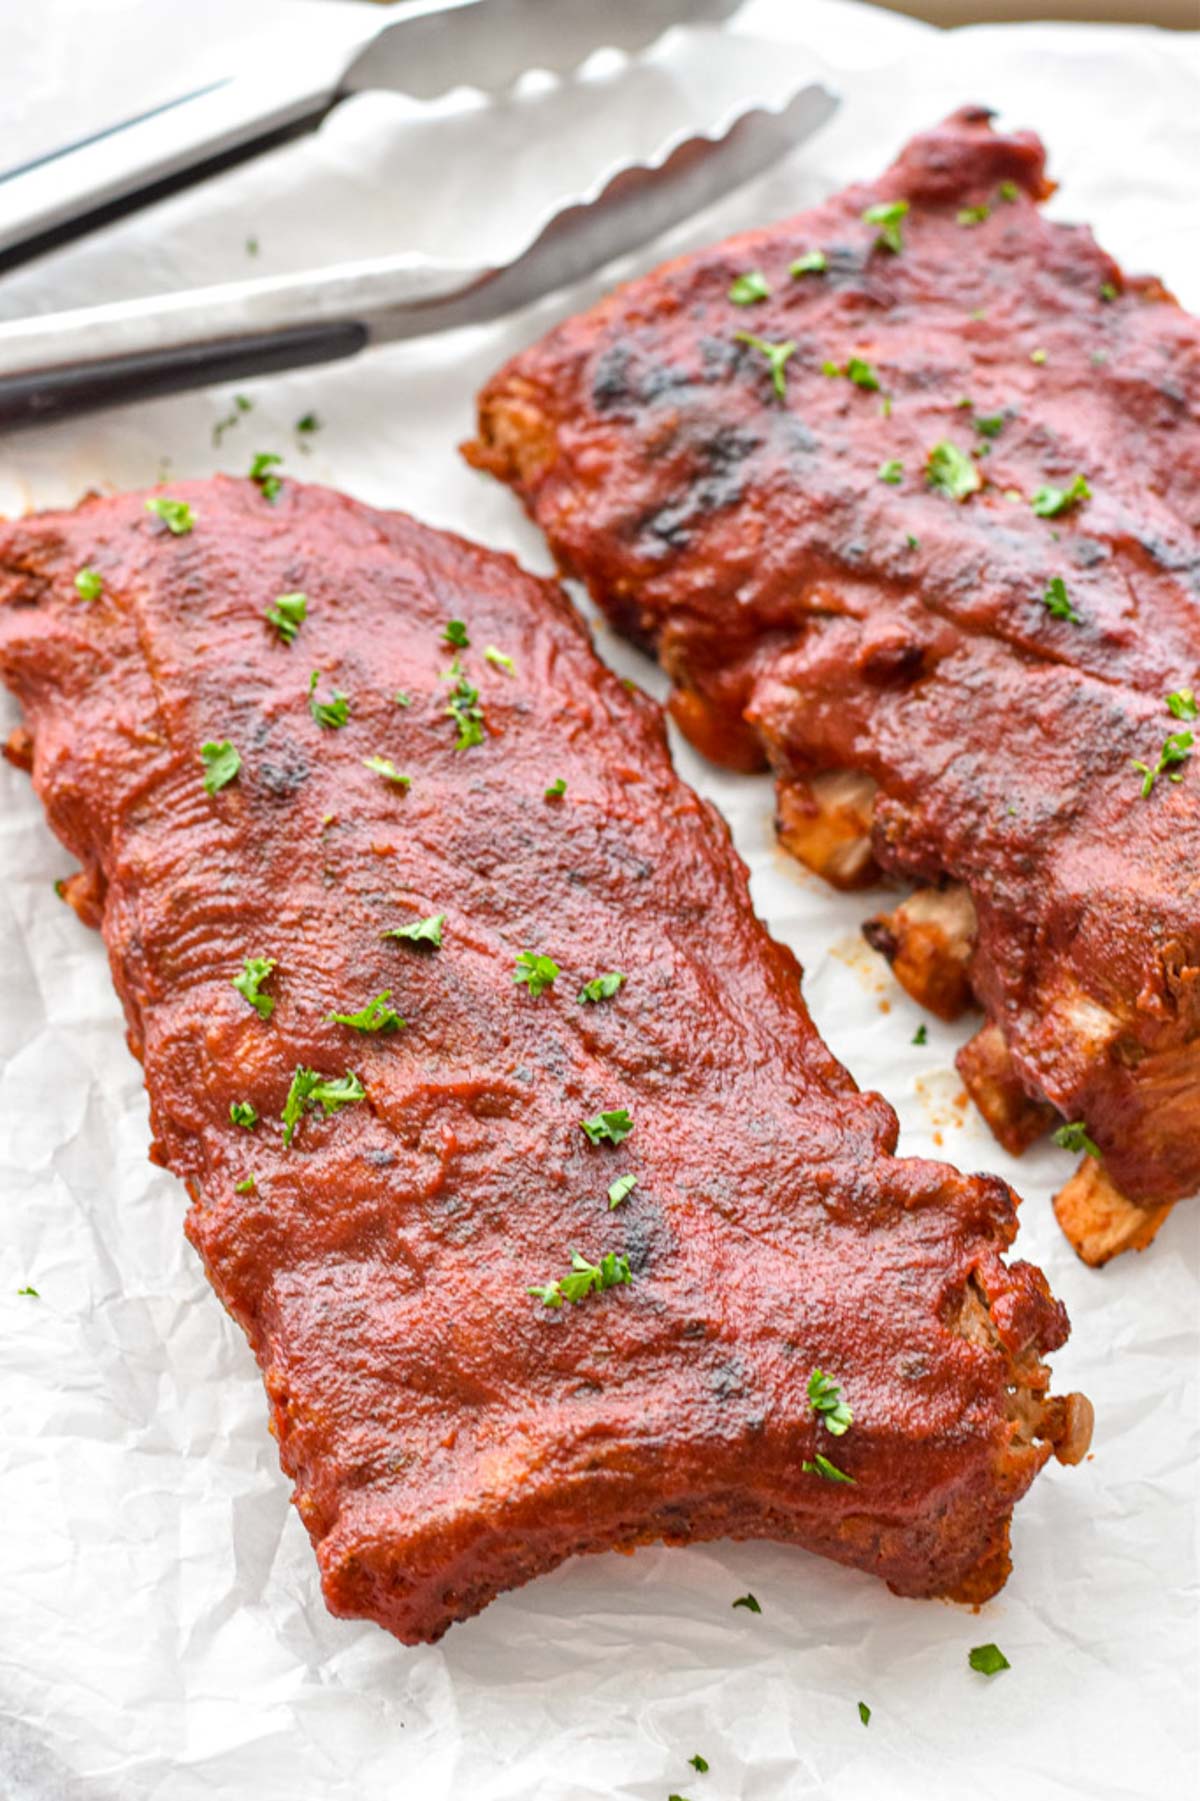 Low FODMAP ribs on parchment paper garnished with chopped parsley in front of tongs